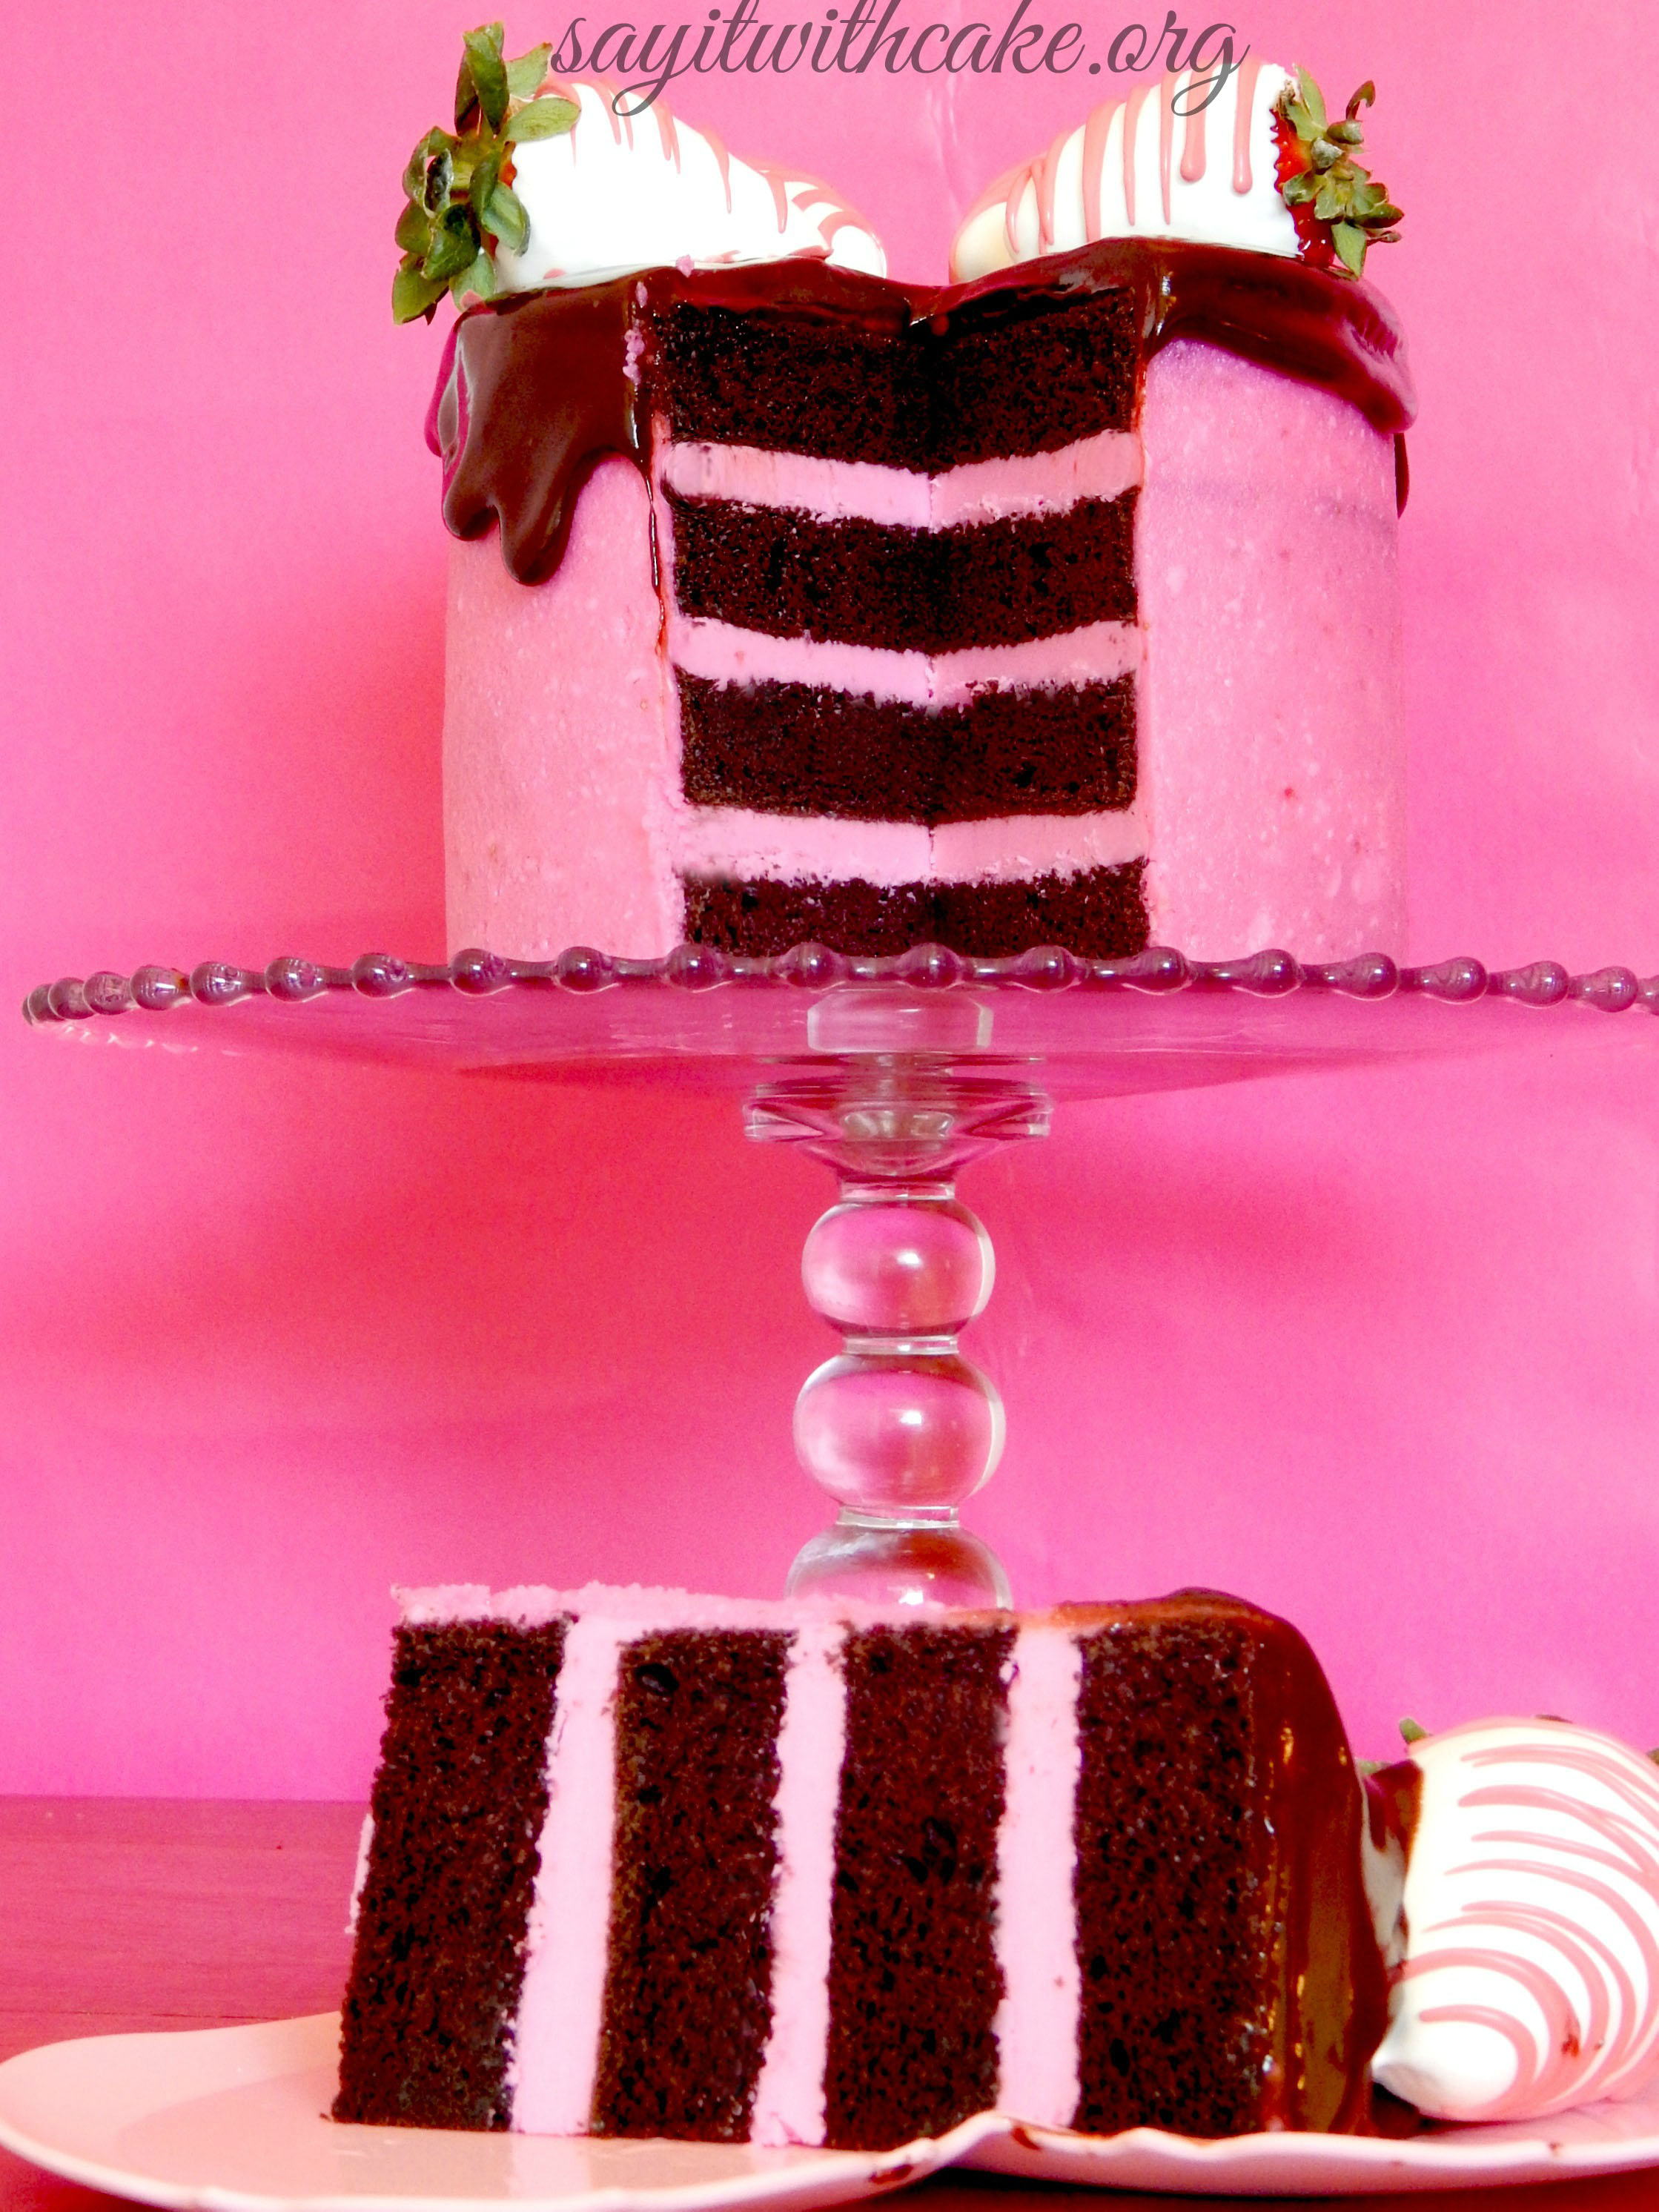 Say It With Cake chocolate strawberry cake